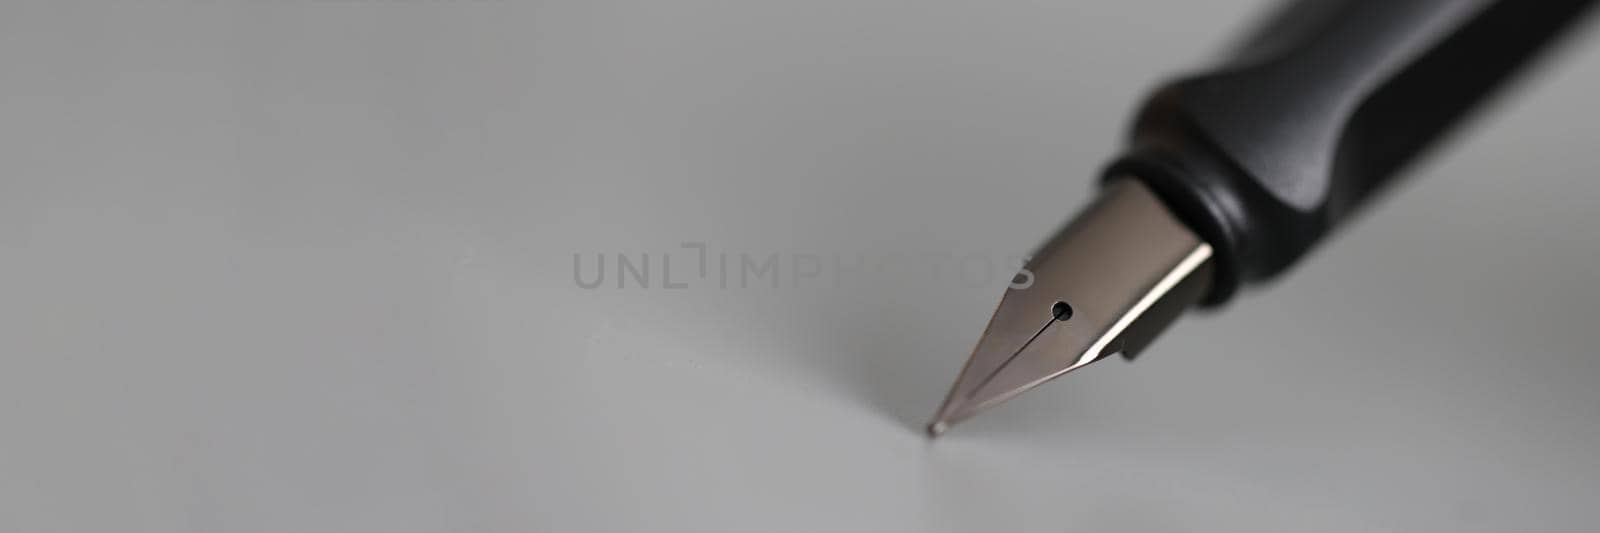 Closeup of metal ink pen head on gray background. Signing of documents concept